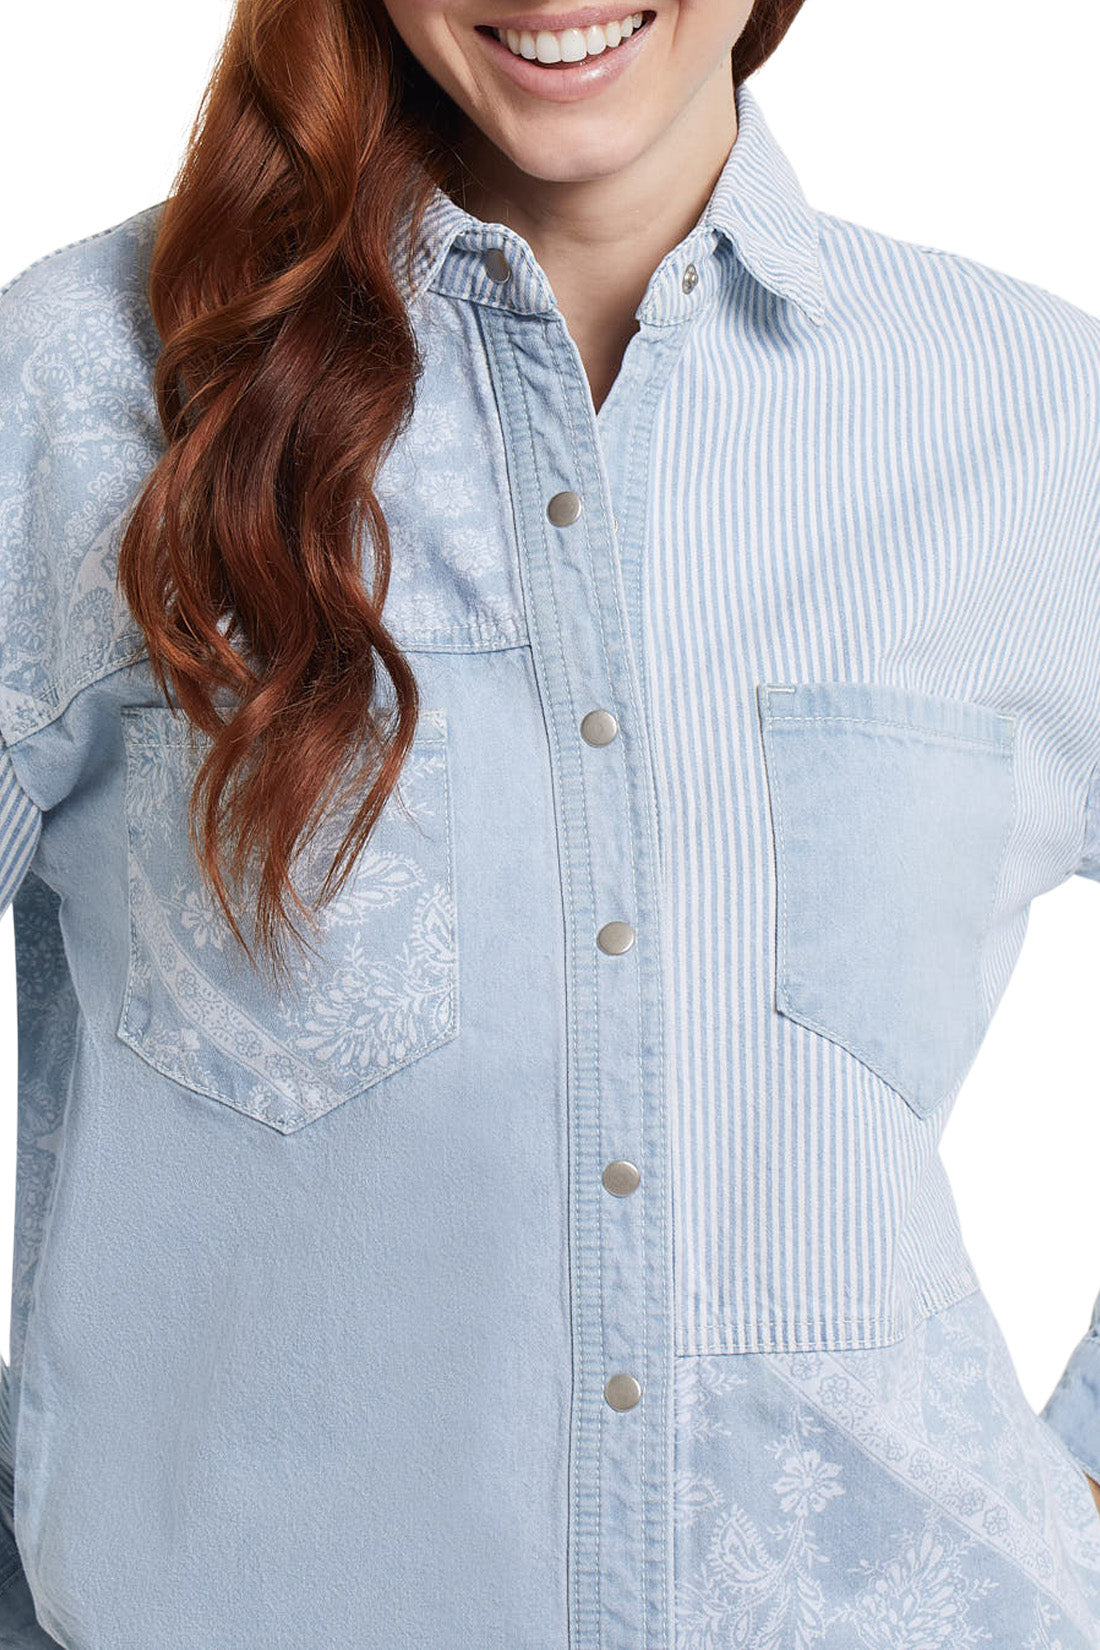 Patchwork Chambray Button Up Shirt by Tribal